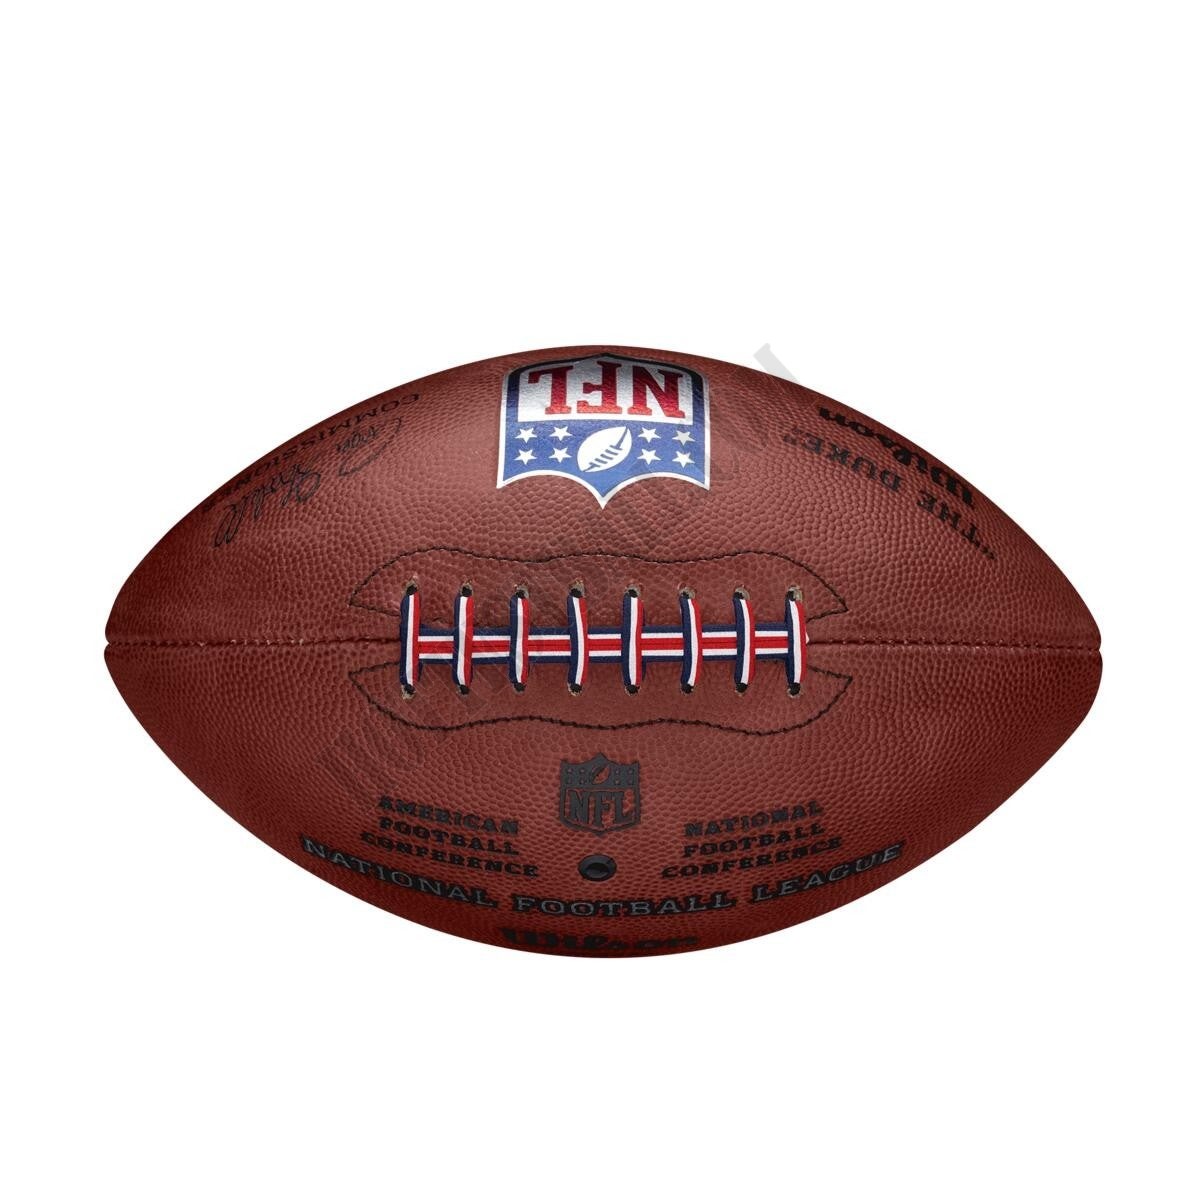 The Duke NFL Football Limited Edition - Wilson Discount Store - -3